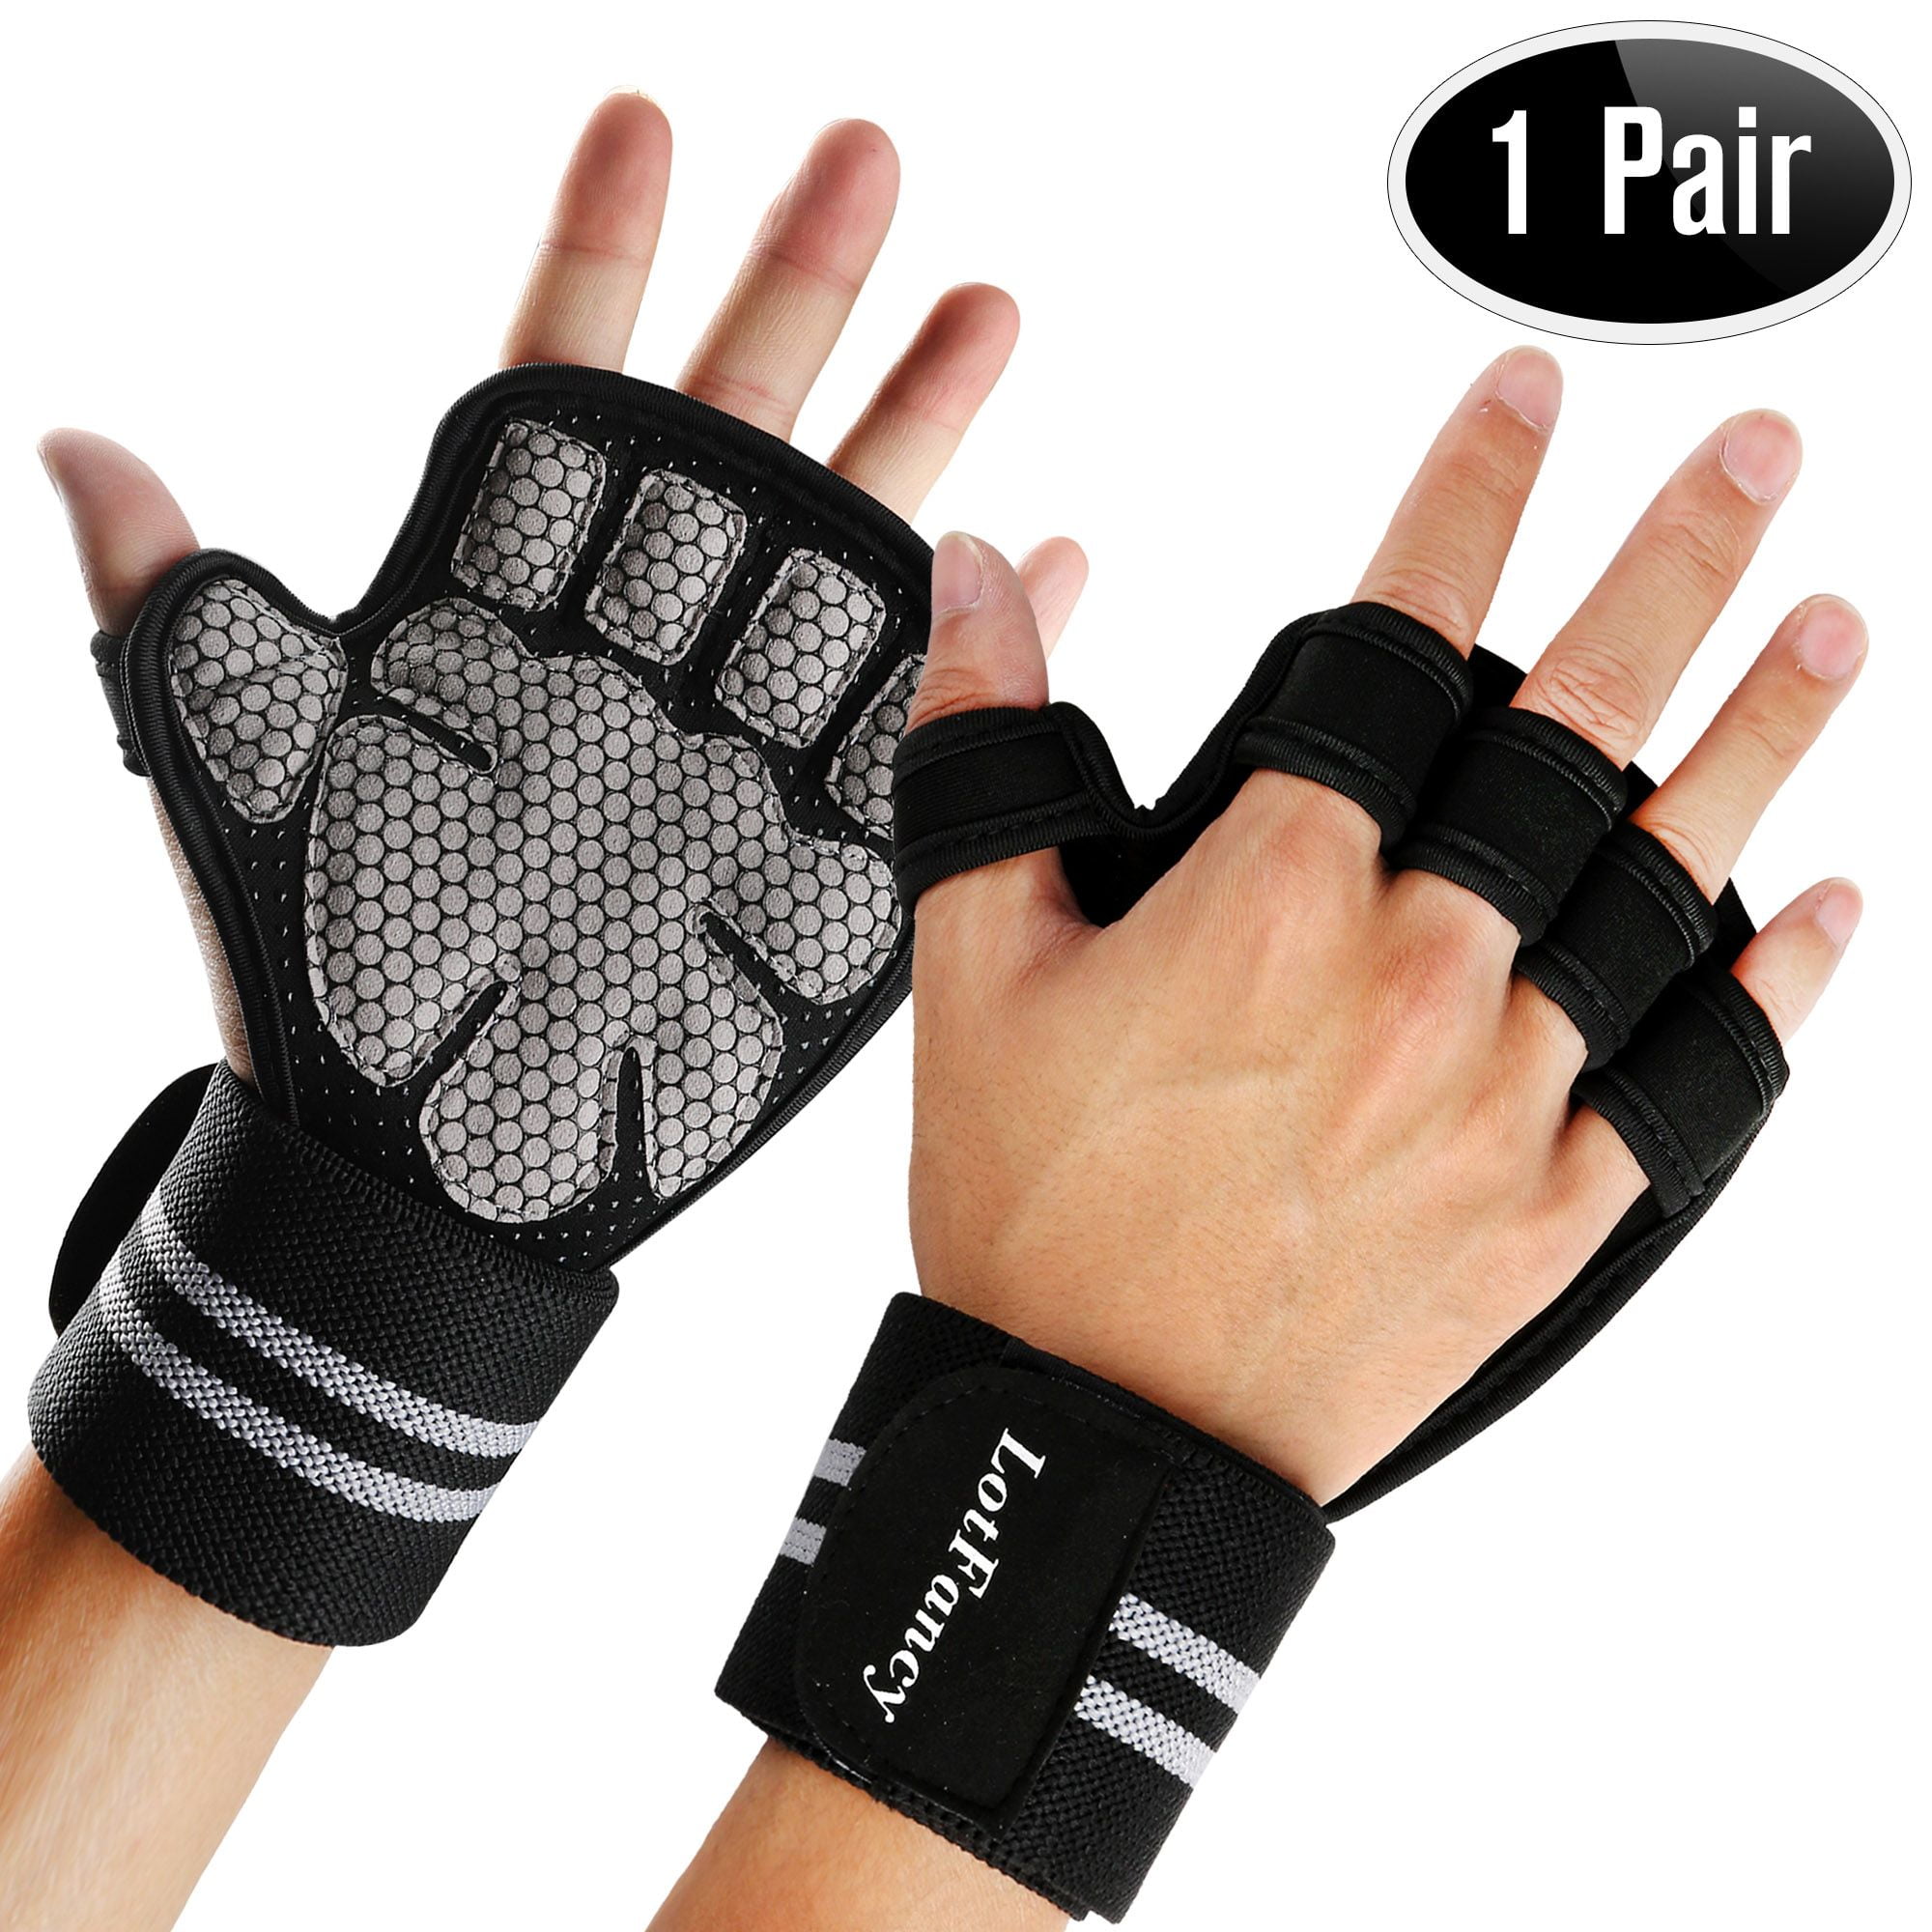 Men's Large CORE Gym Weight Lifting Gloves high quality with wrist straps